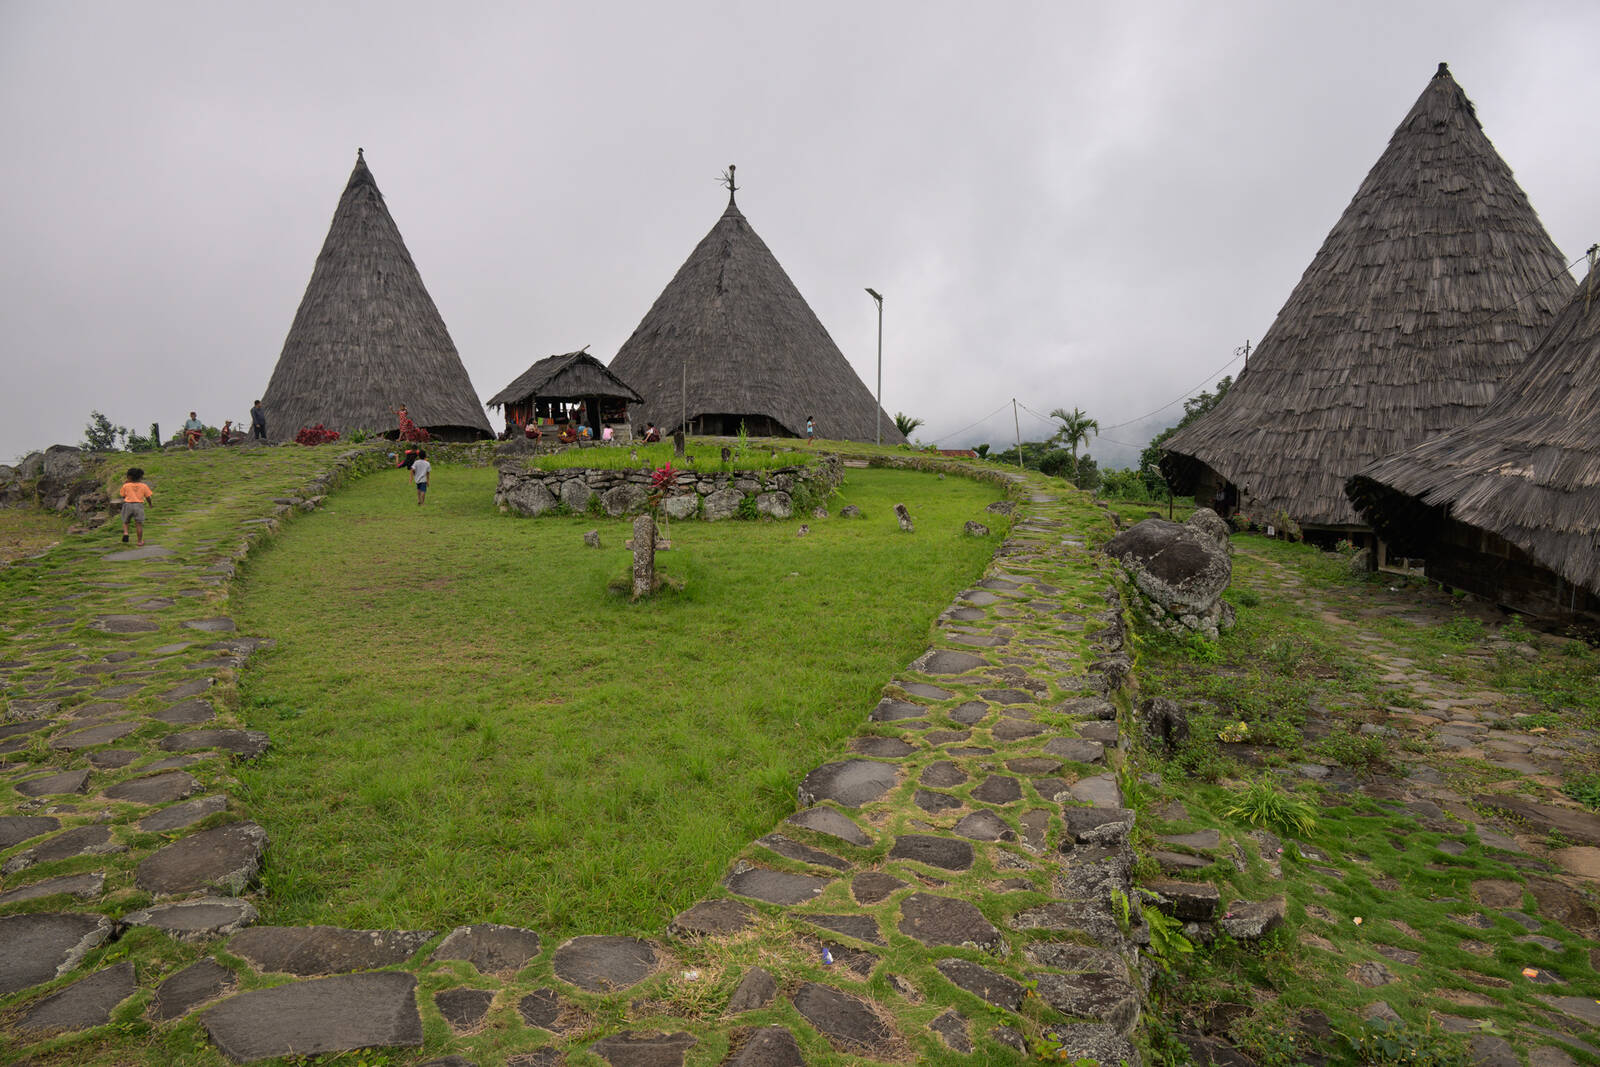 Image of Todo Traditional Village by Luka Esenko